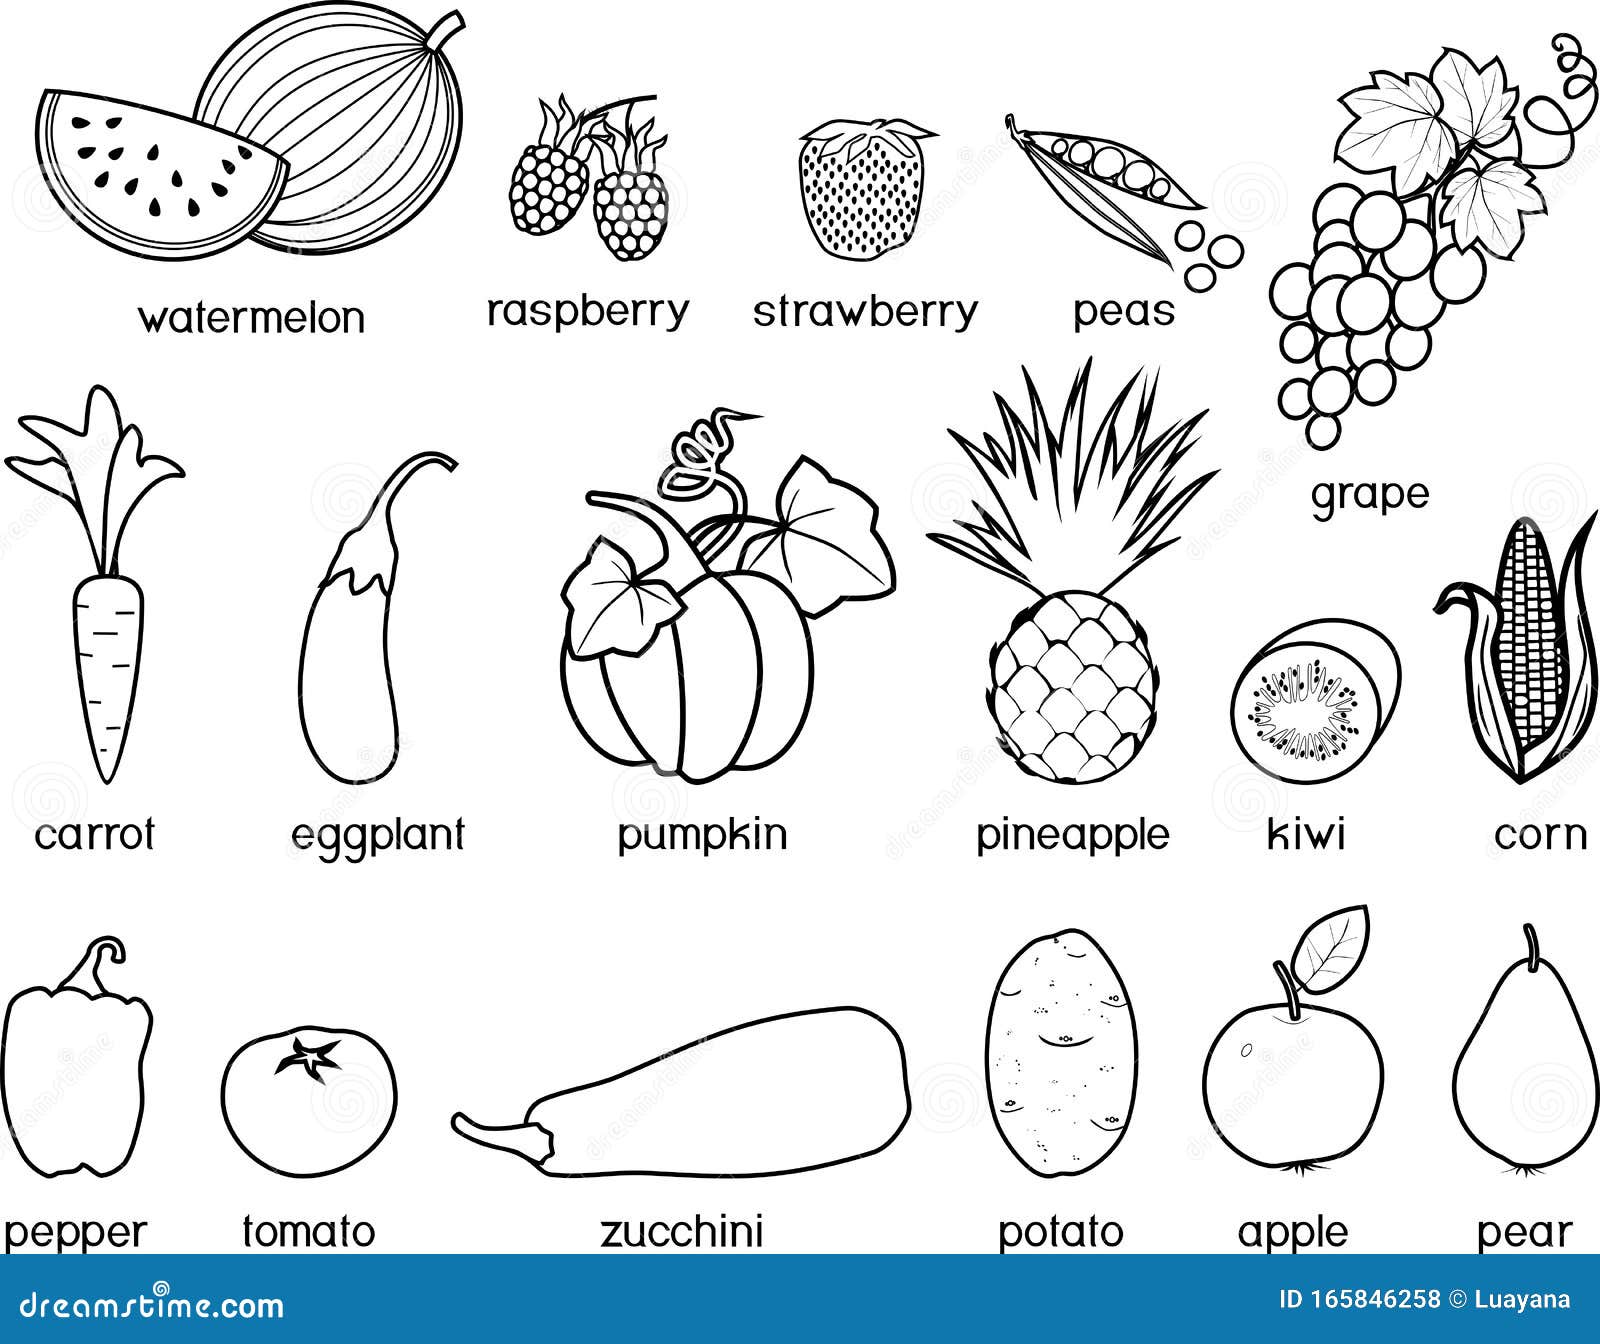 Coloring Page. Big Set of Different Fruits and Vegetables Stock ...